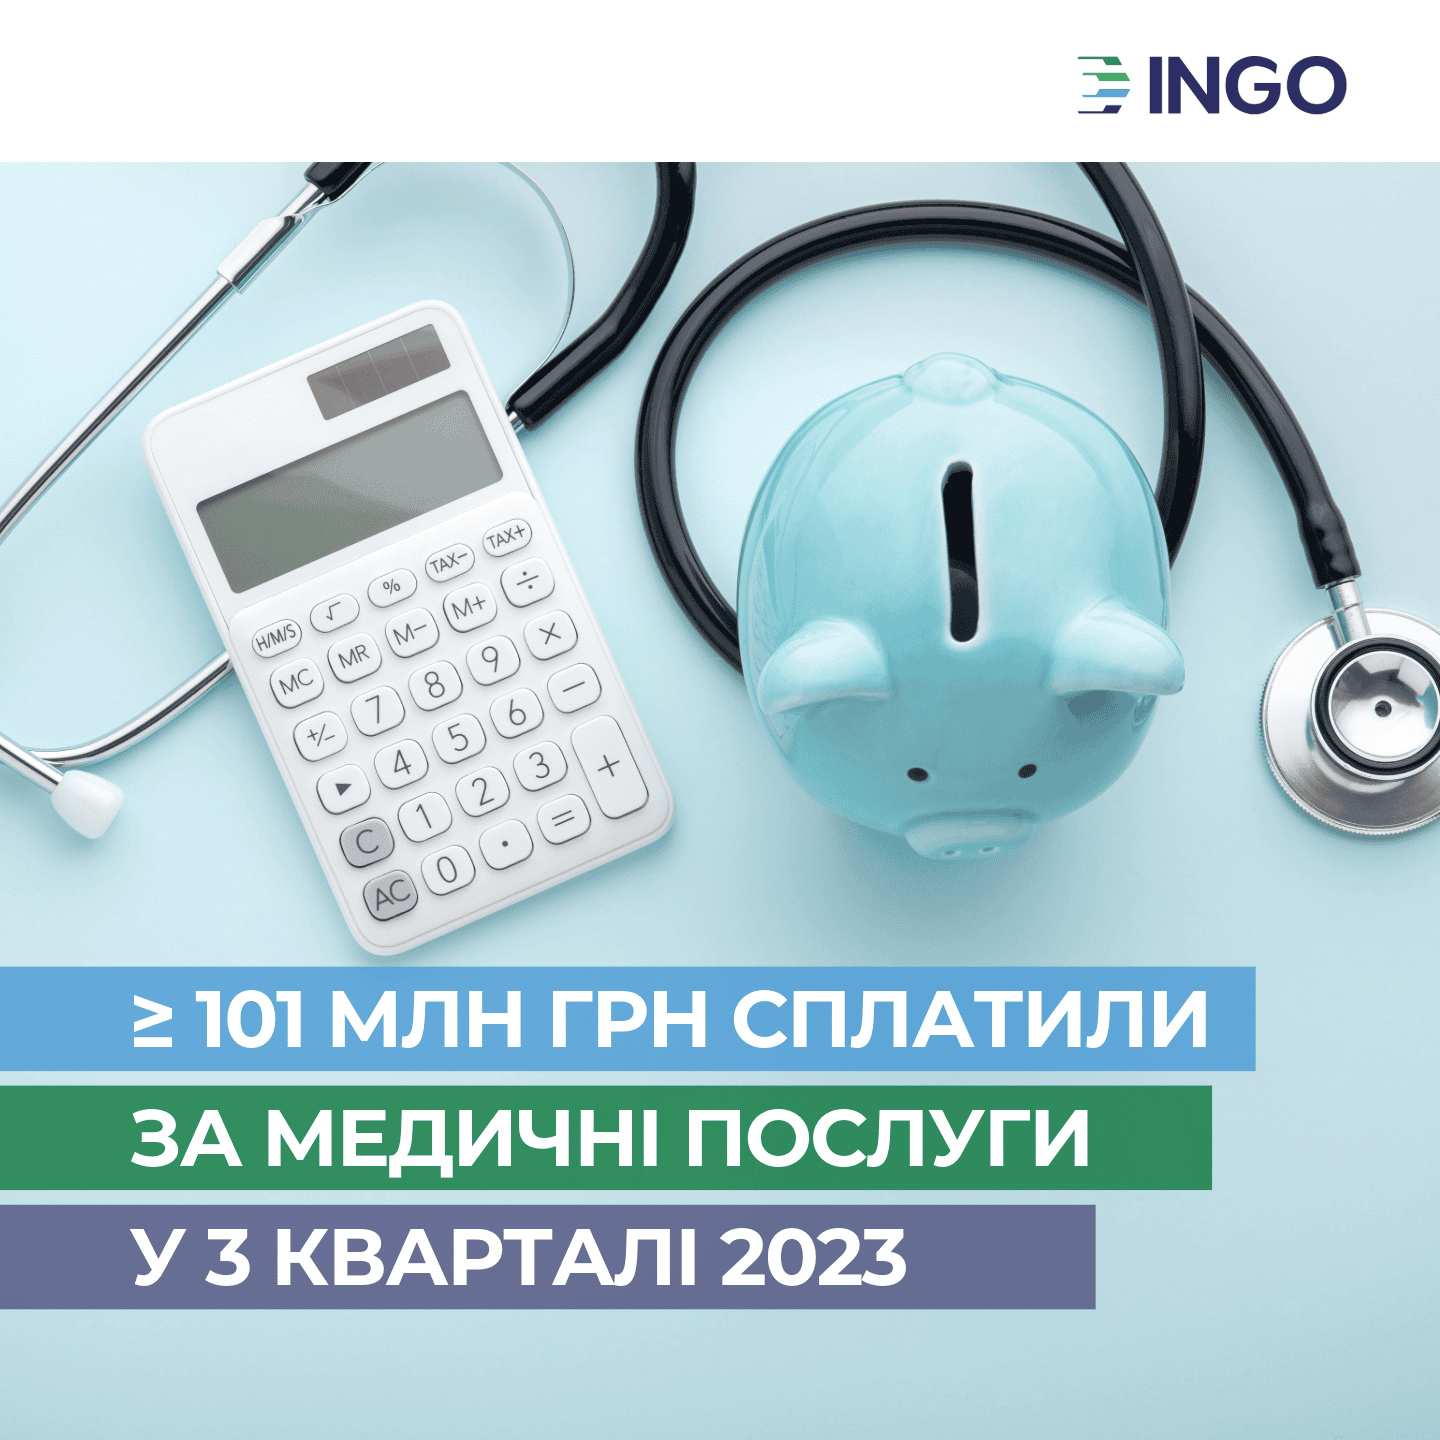 «INGO» paid over UAH 101 million for medical services of the insured in Q3